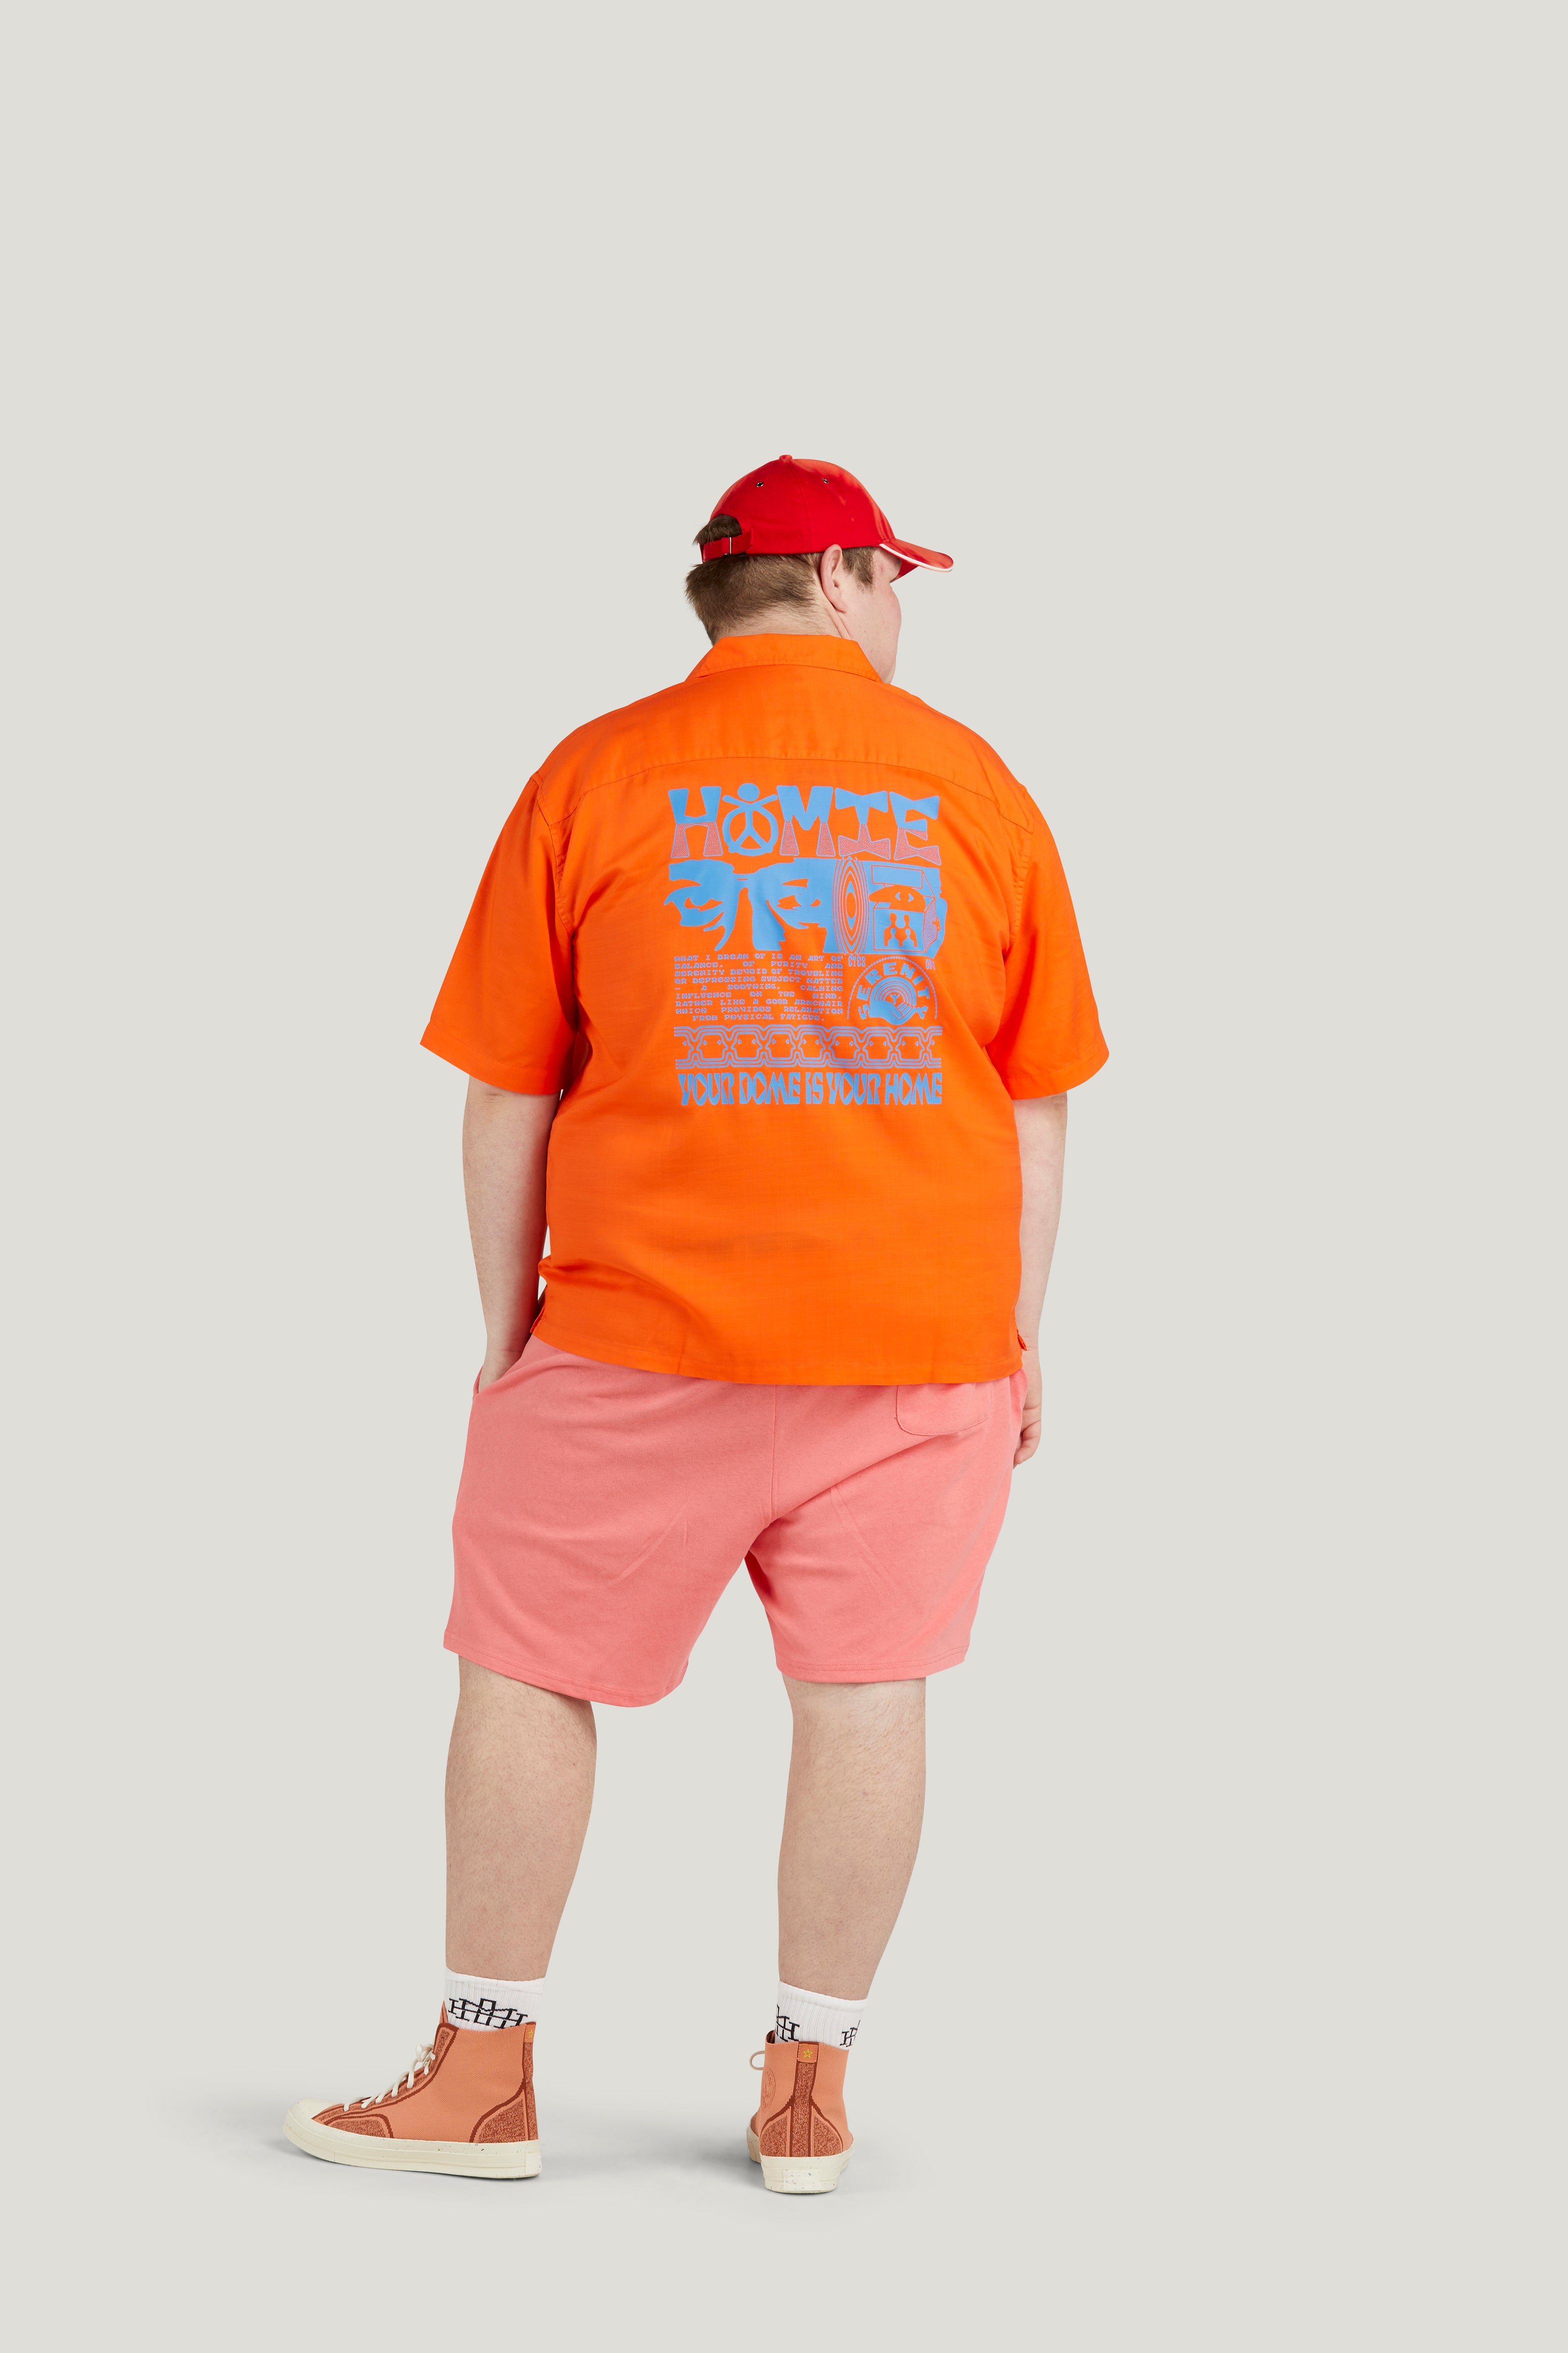 Your Dome Is Your Home Shirt - Orange